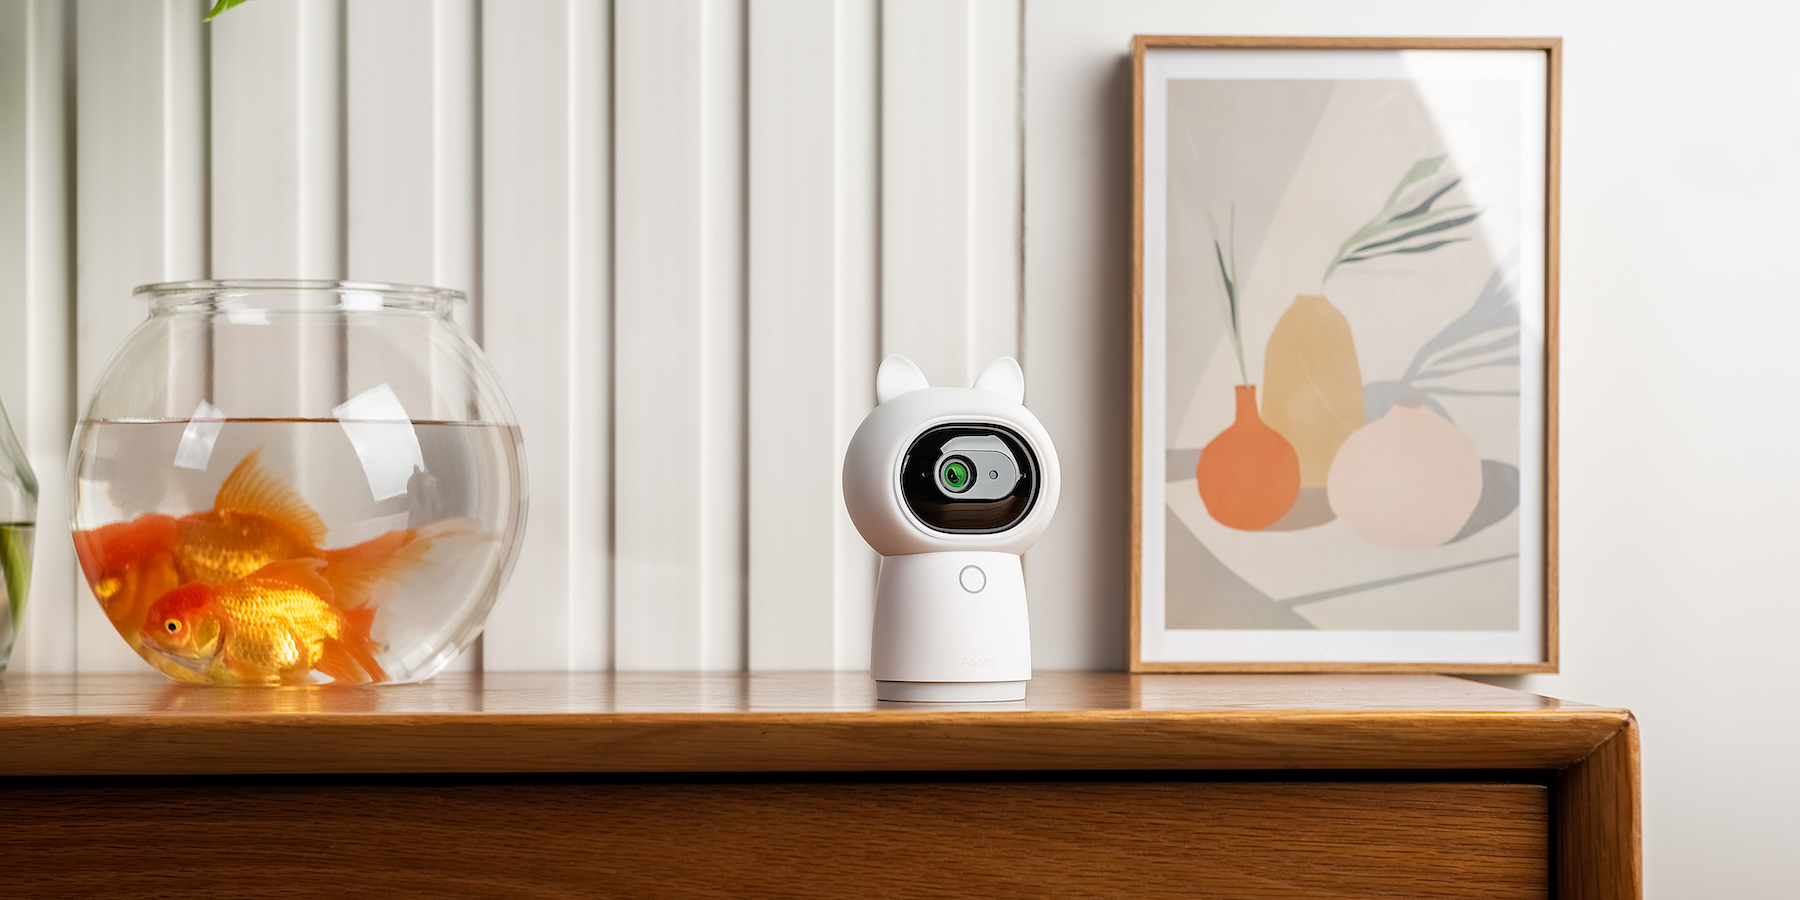 Aqara - The Aqara Hub M2 makes your Aqara devices compatible with a wide  range of smart home ecosystems and voice assistants. Apple HomeKit, Google  Assistant,  Alexa and more are supported.